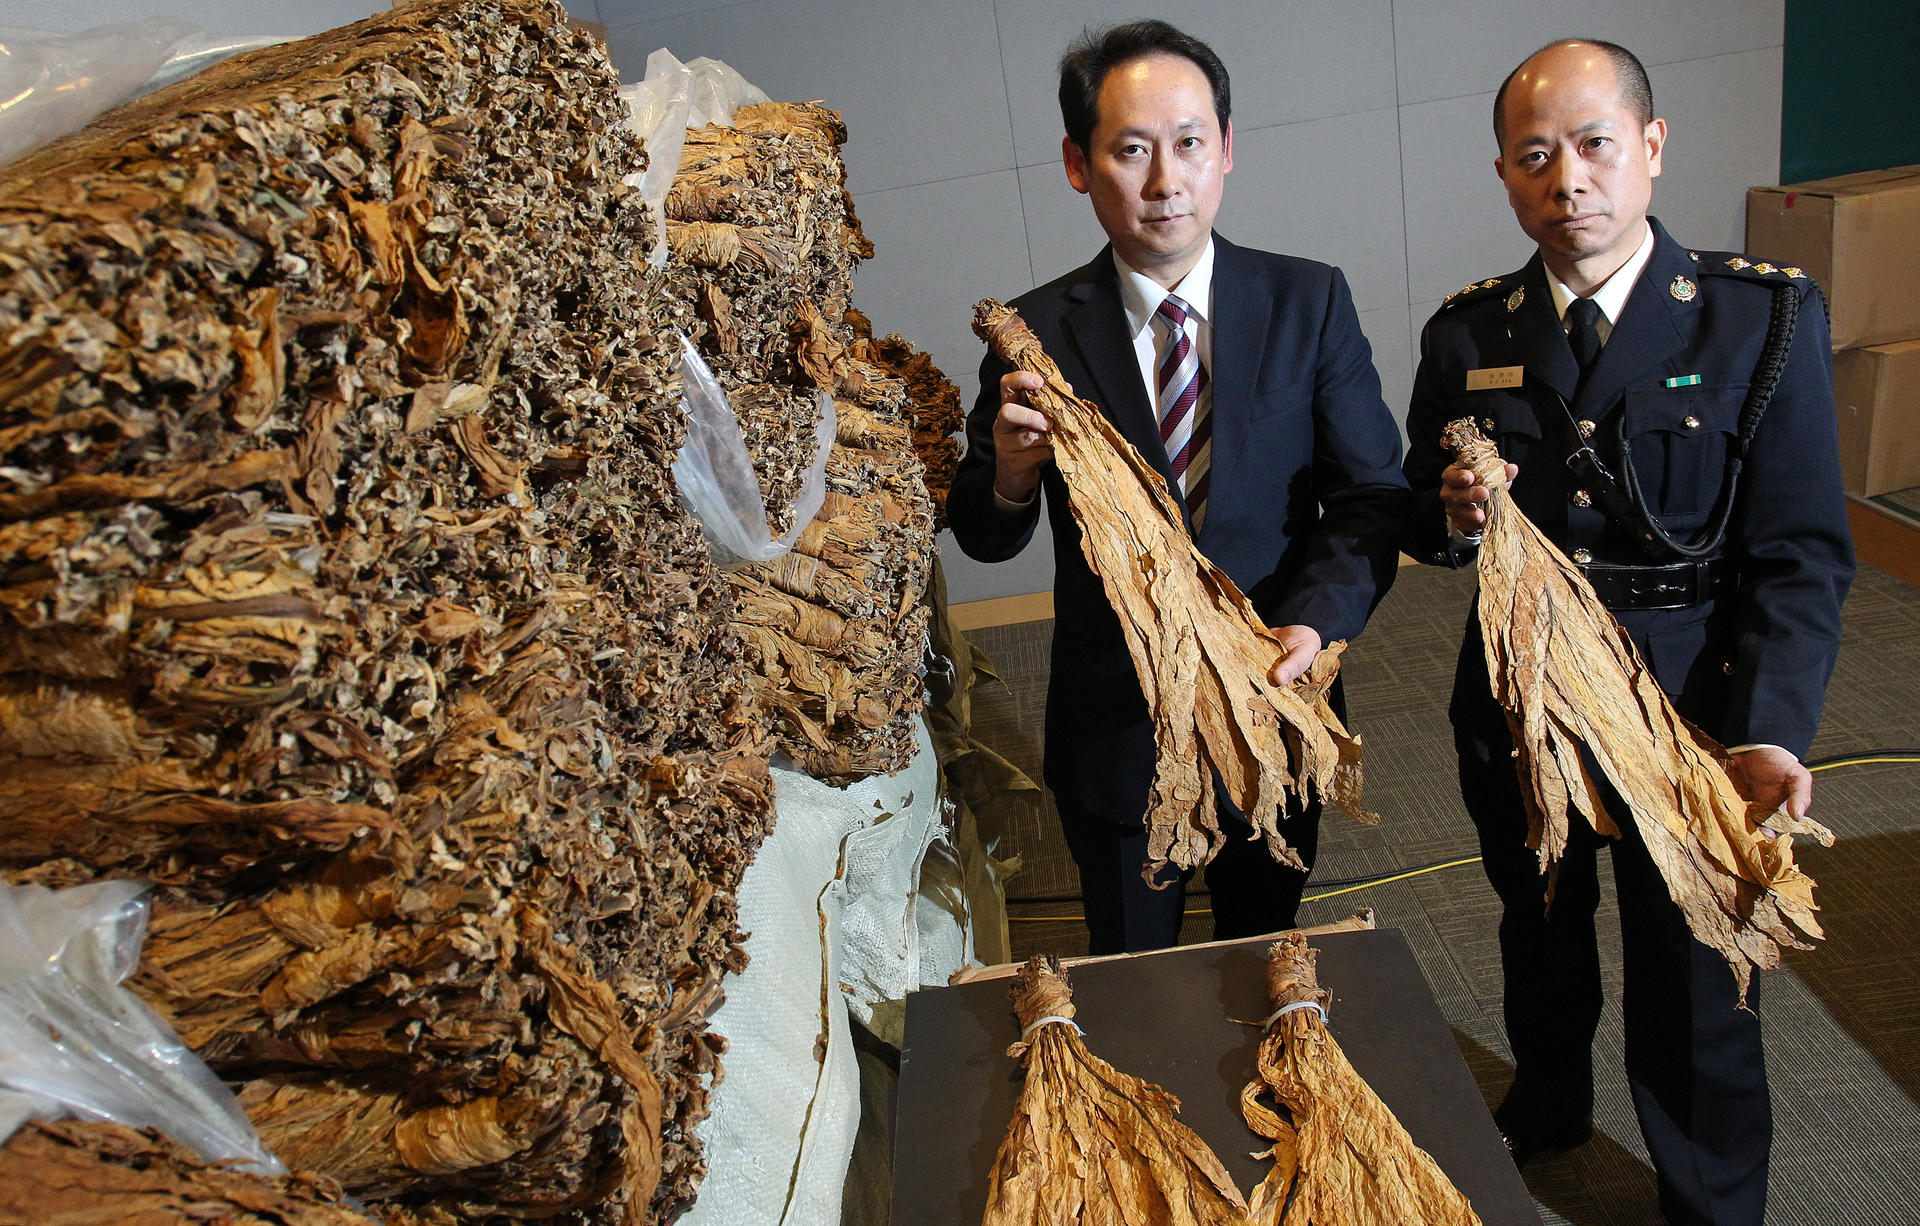 Customs officers Simon Wan (left) and Tse Pok-chung show off some of the massive haul of seized tobacco. Photo: May Tse